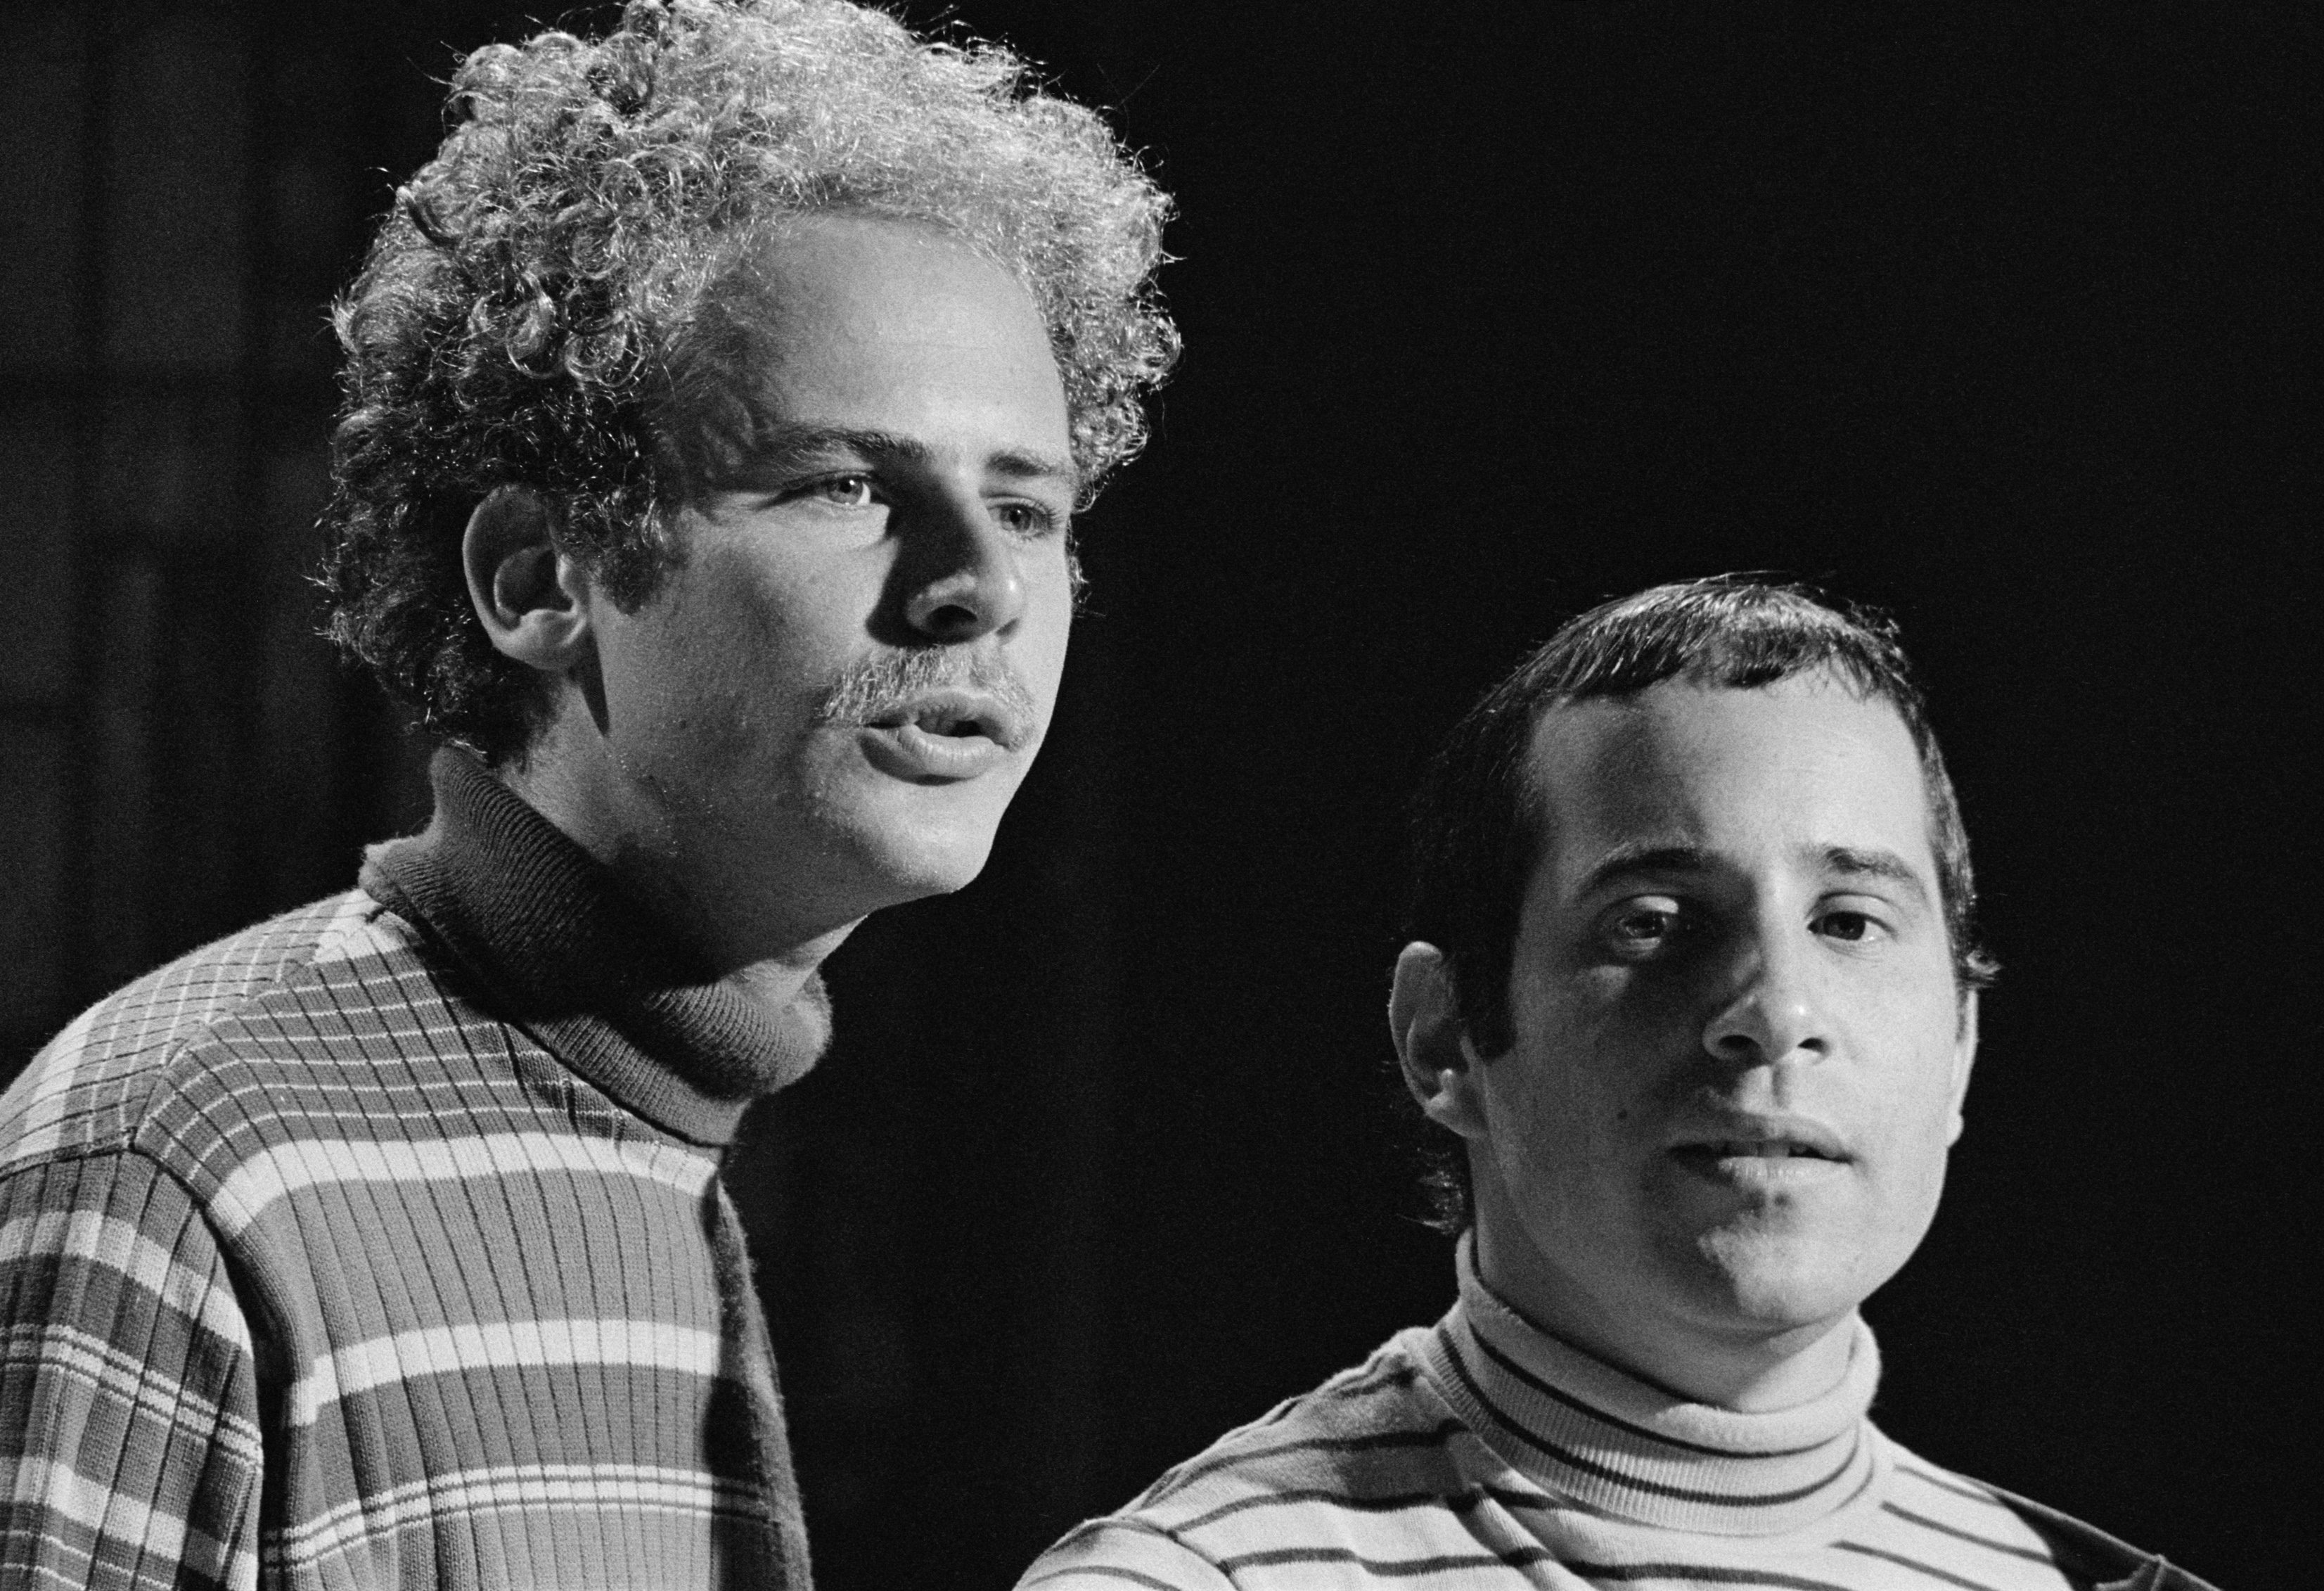 Simon & Garfunkel playing songs on 'The Smothers Brothers Comedy Hour'